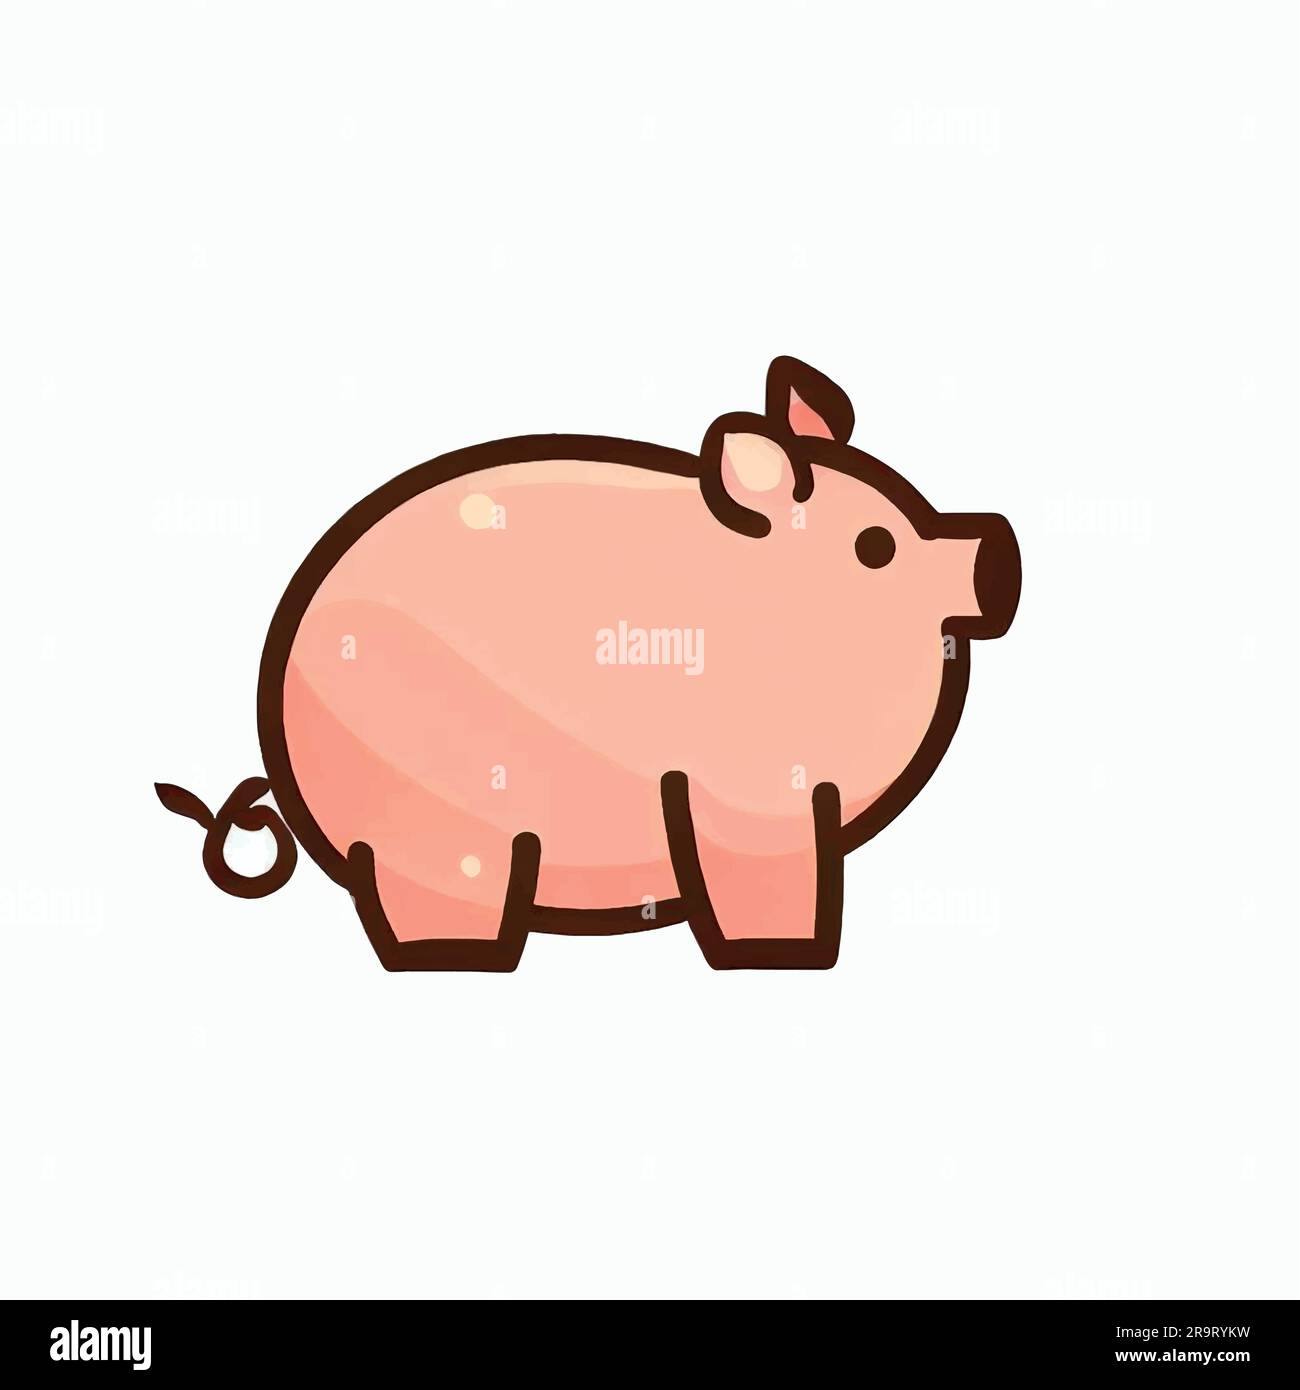 natural pig illustration on its side on a white background Stock Vector